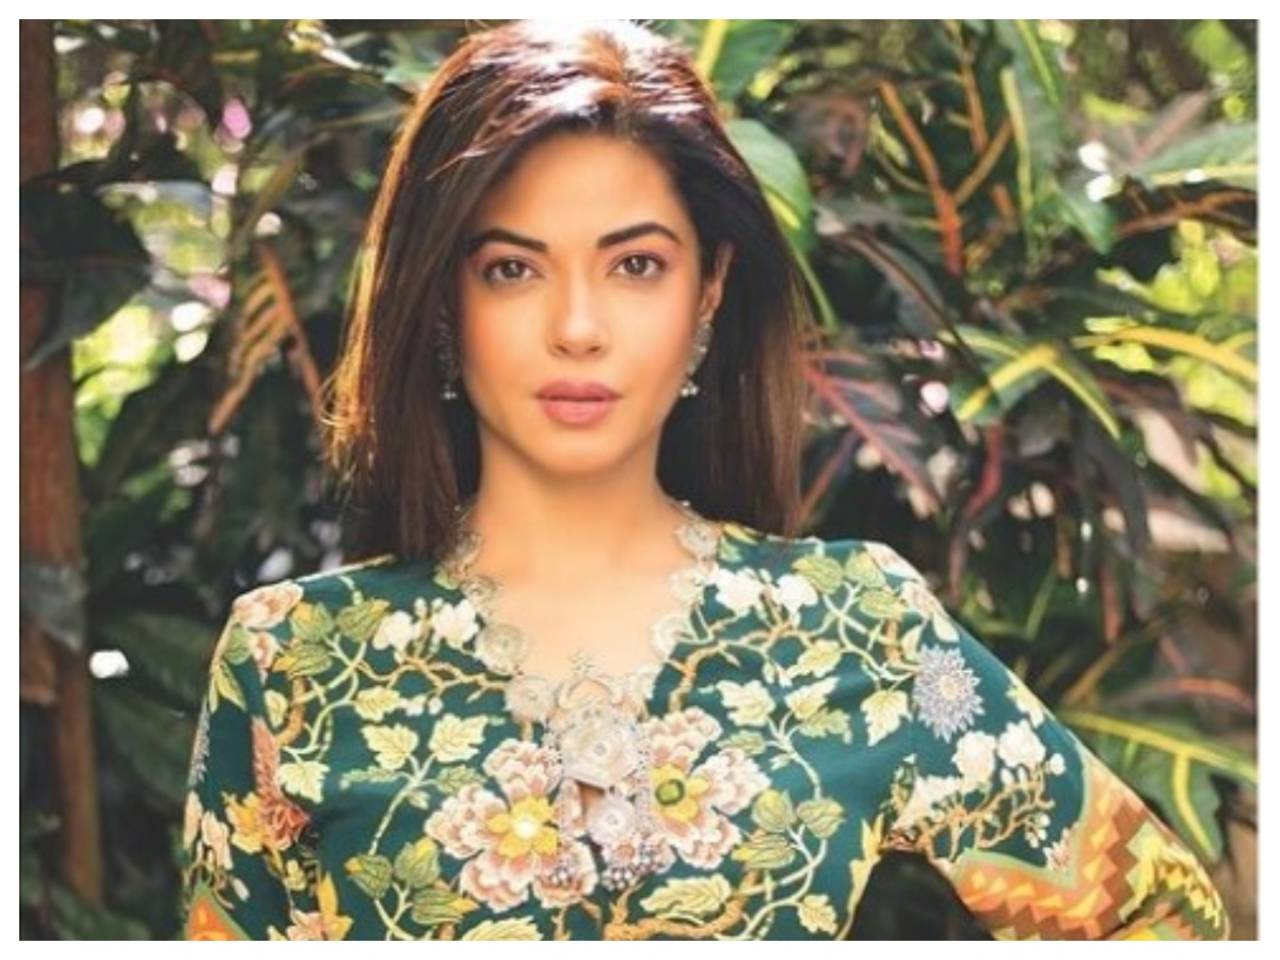 Meera Chopra on shooting in Kamathipura: We shot mostly without consent  because it is difficult to get permission there, especially at night |  Hindi Movie News - Times of India